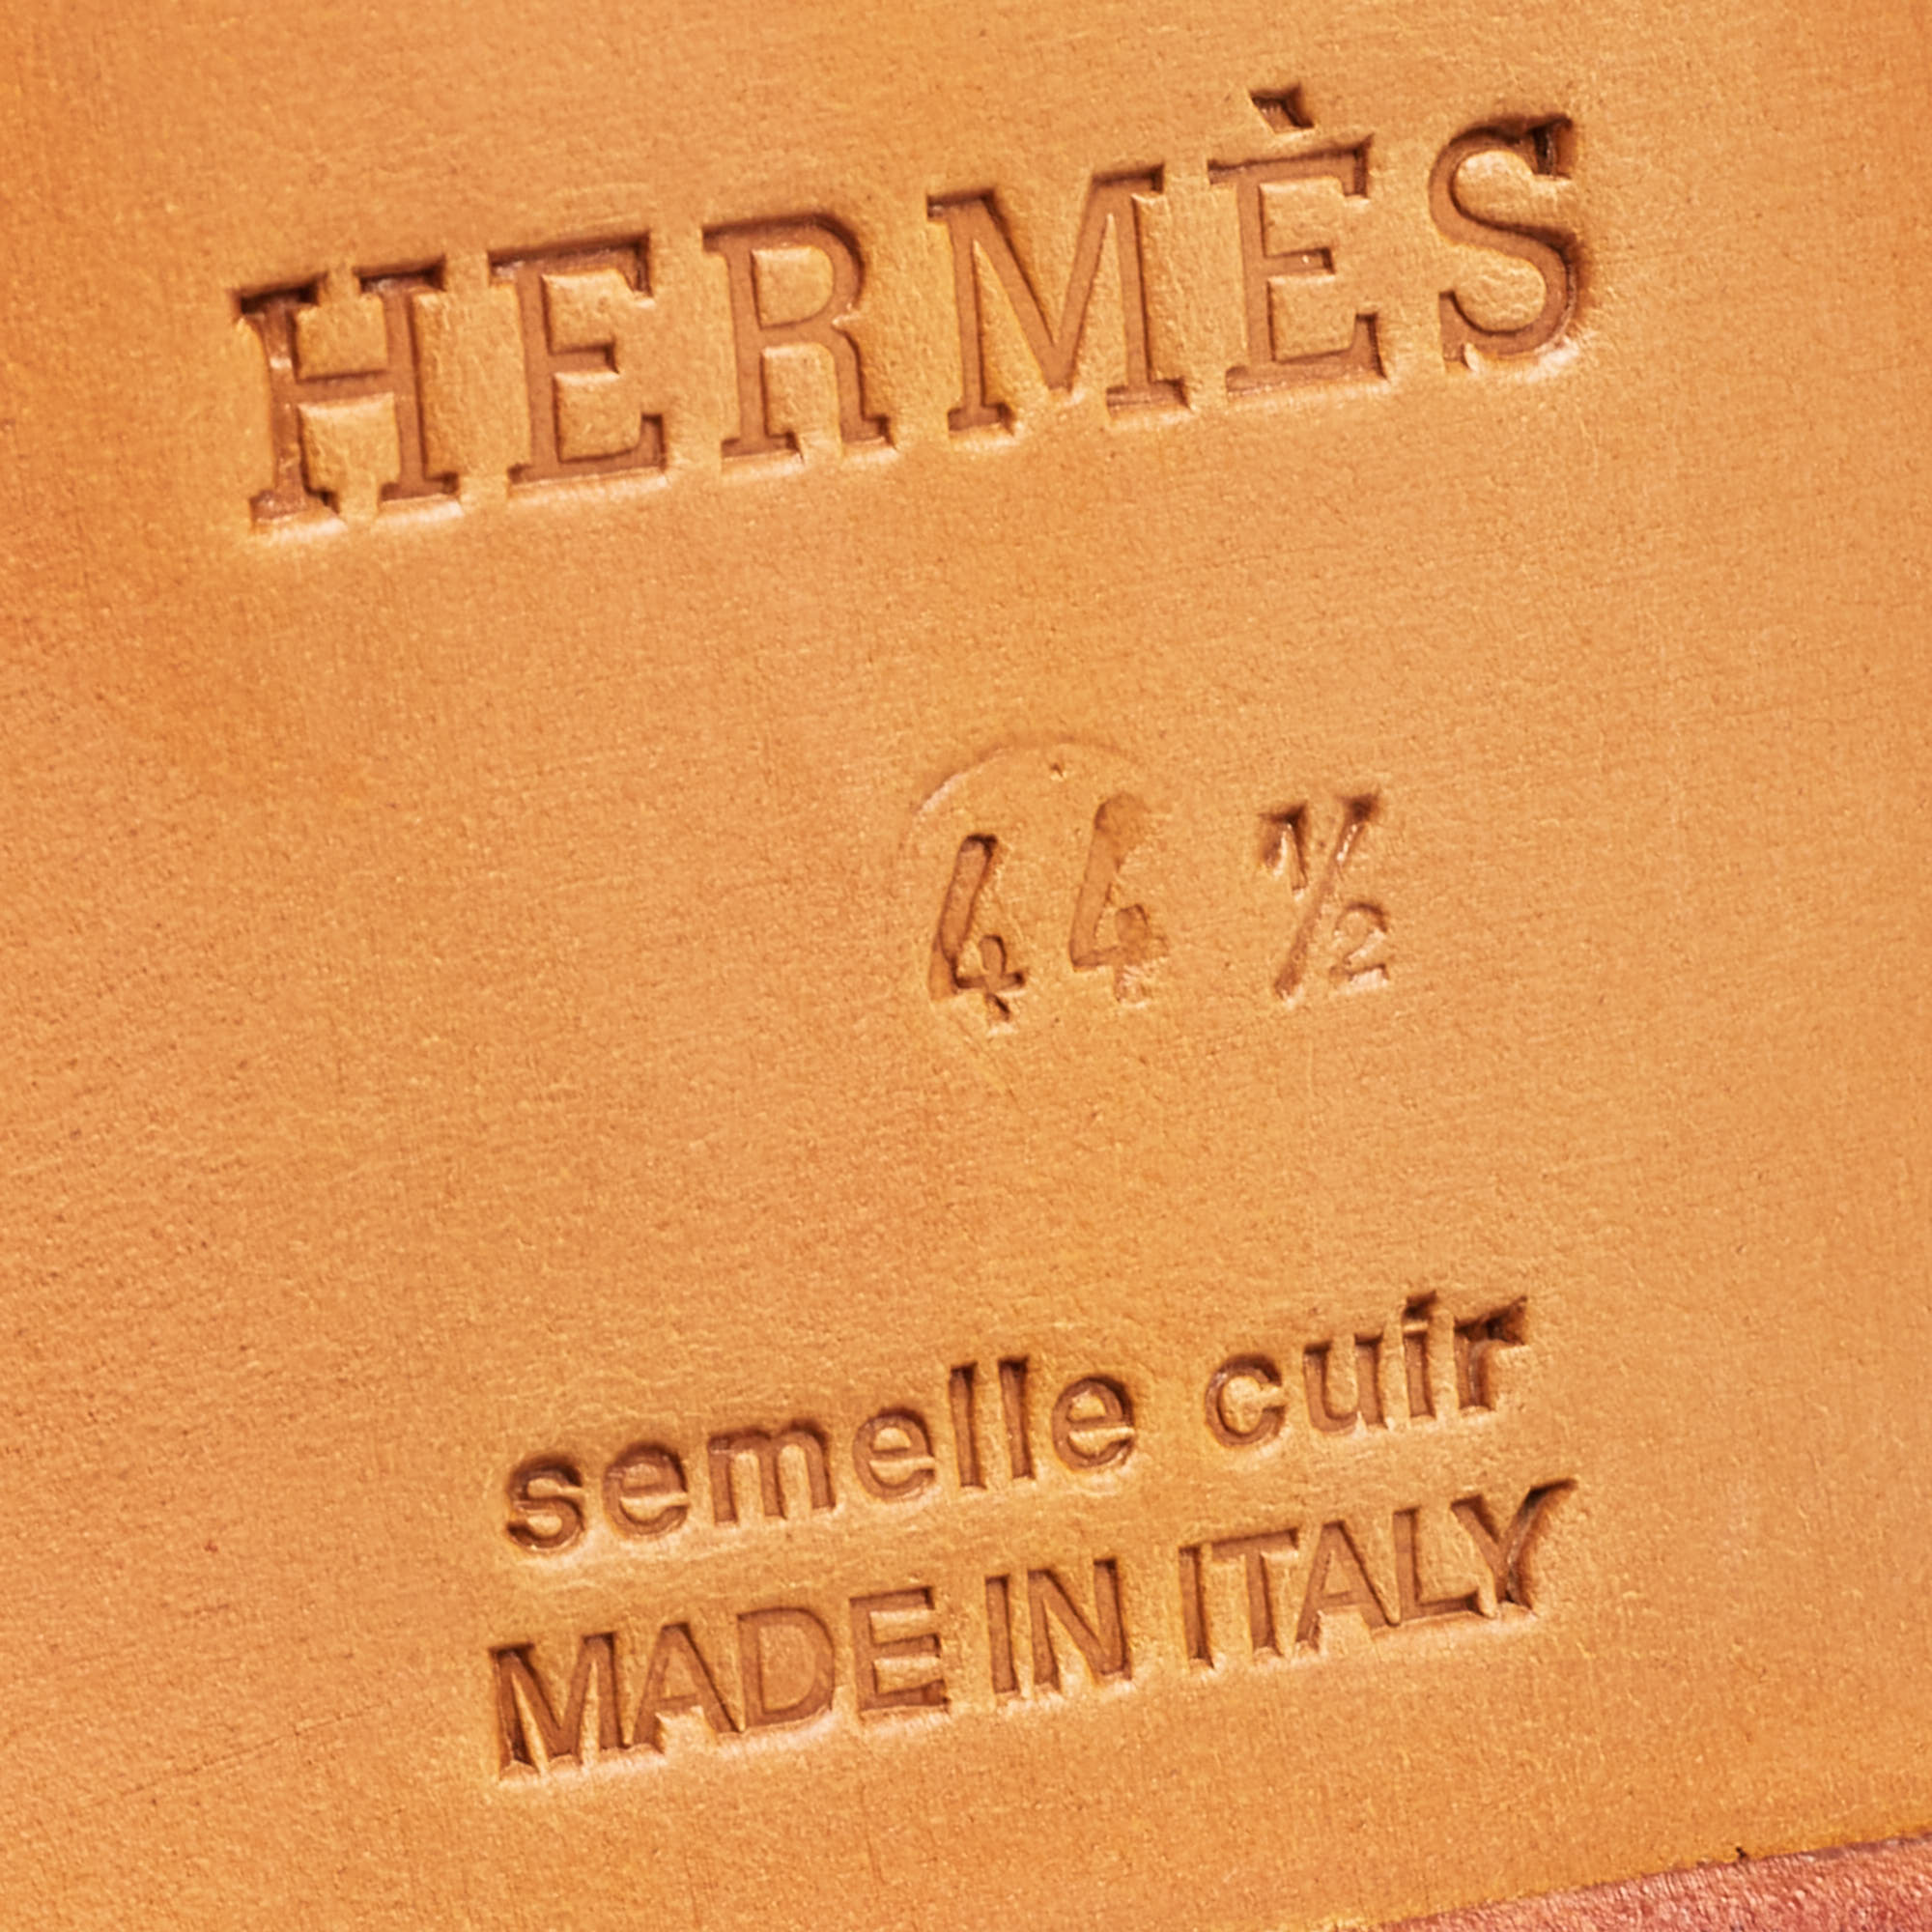 Hermes Brown Leather Kent Derby Size 44.5